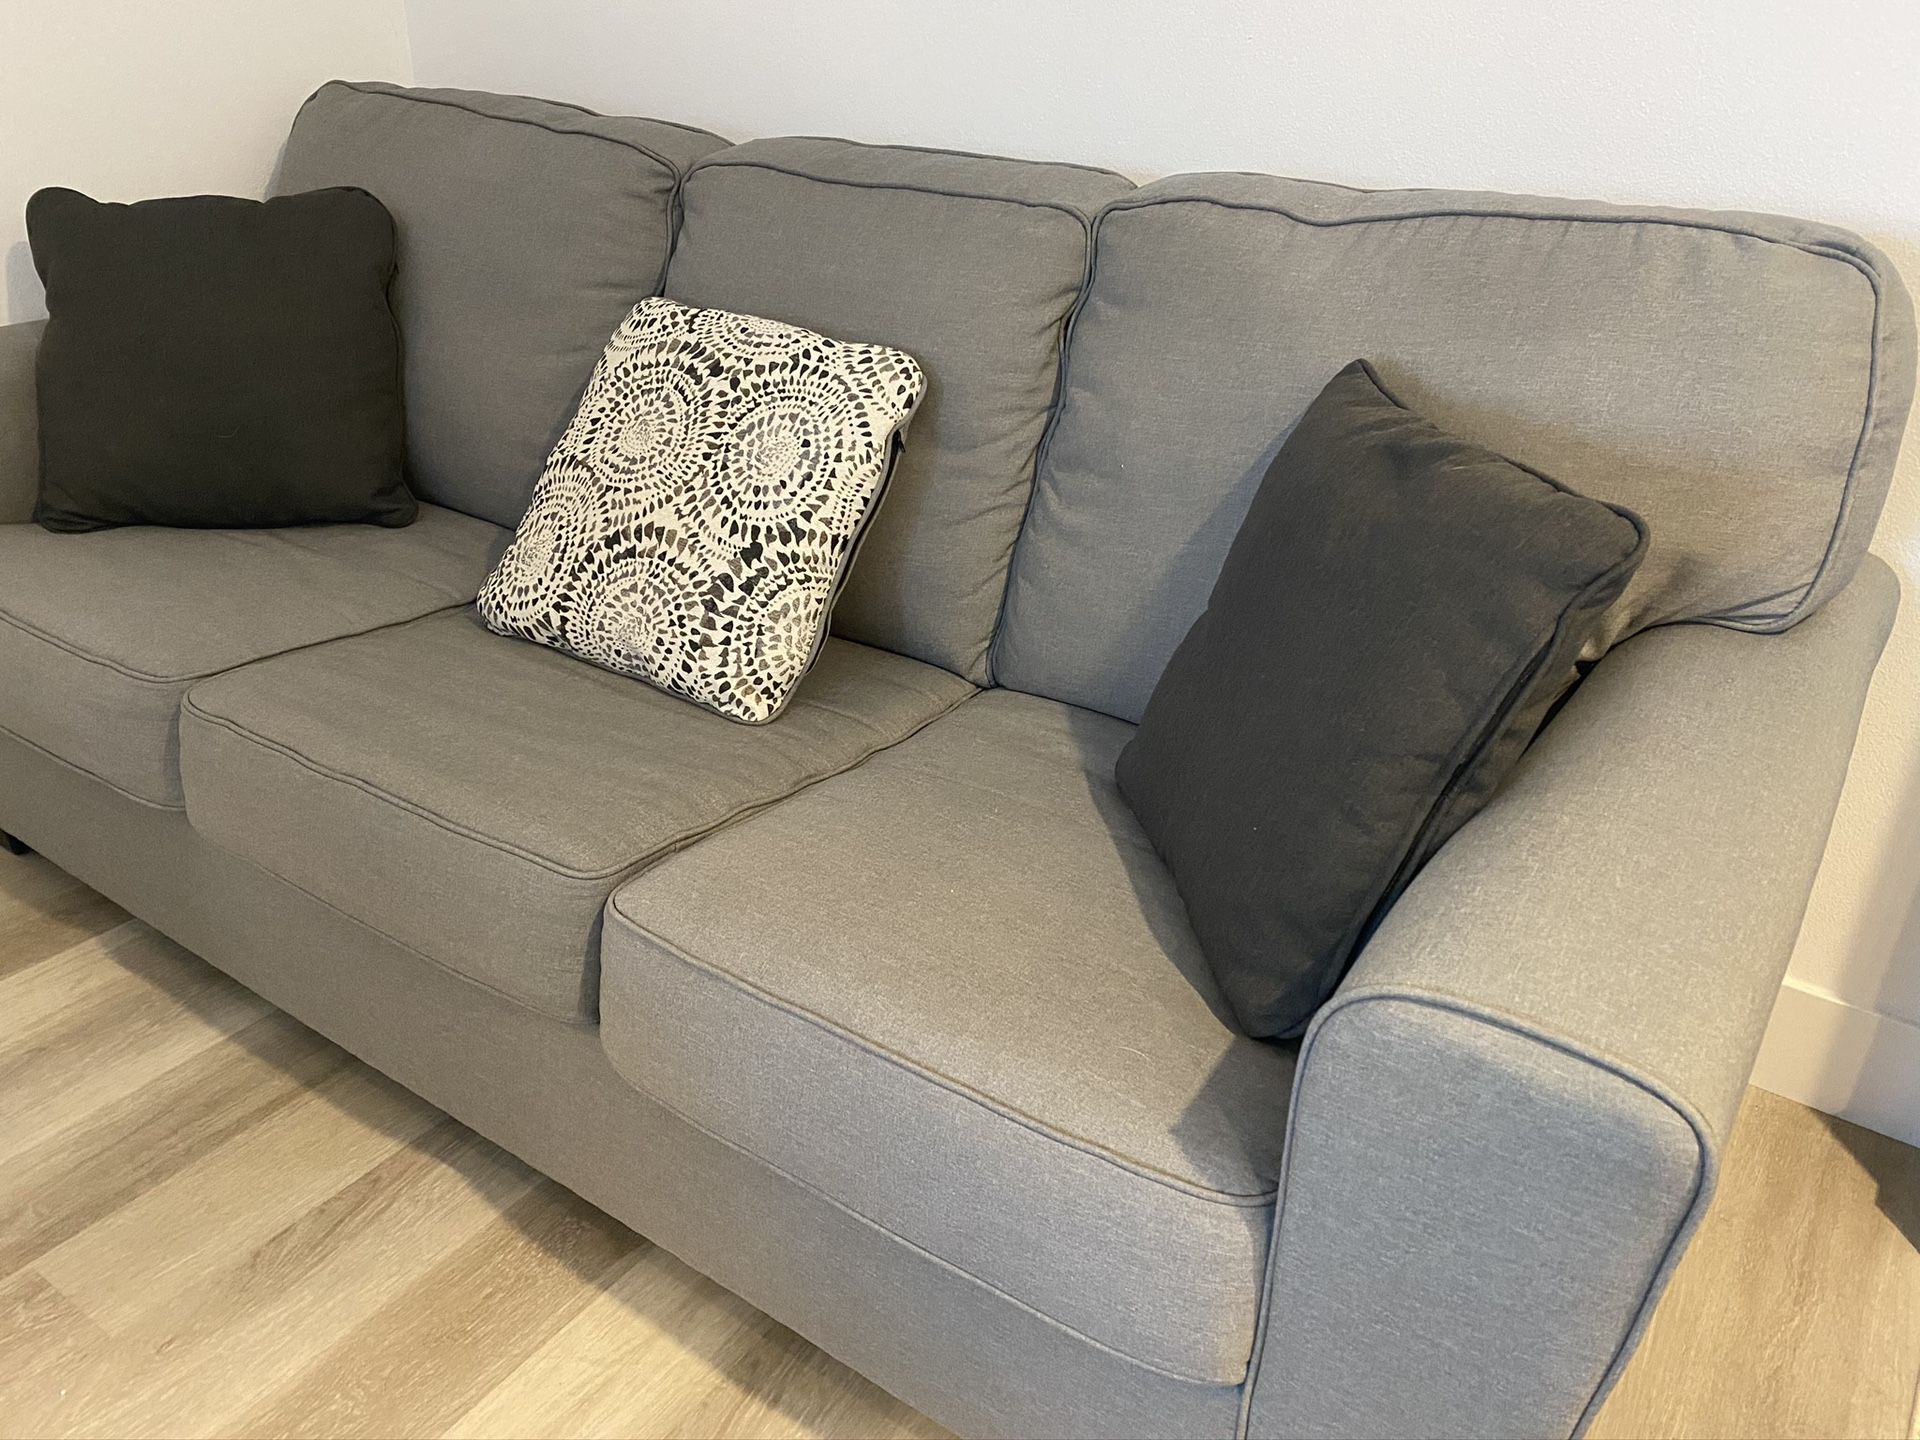 Selling Gray Sofa - FREE but w/ small stain